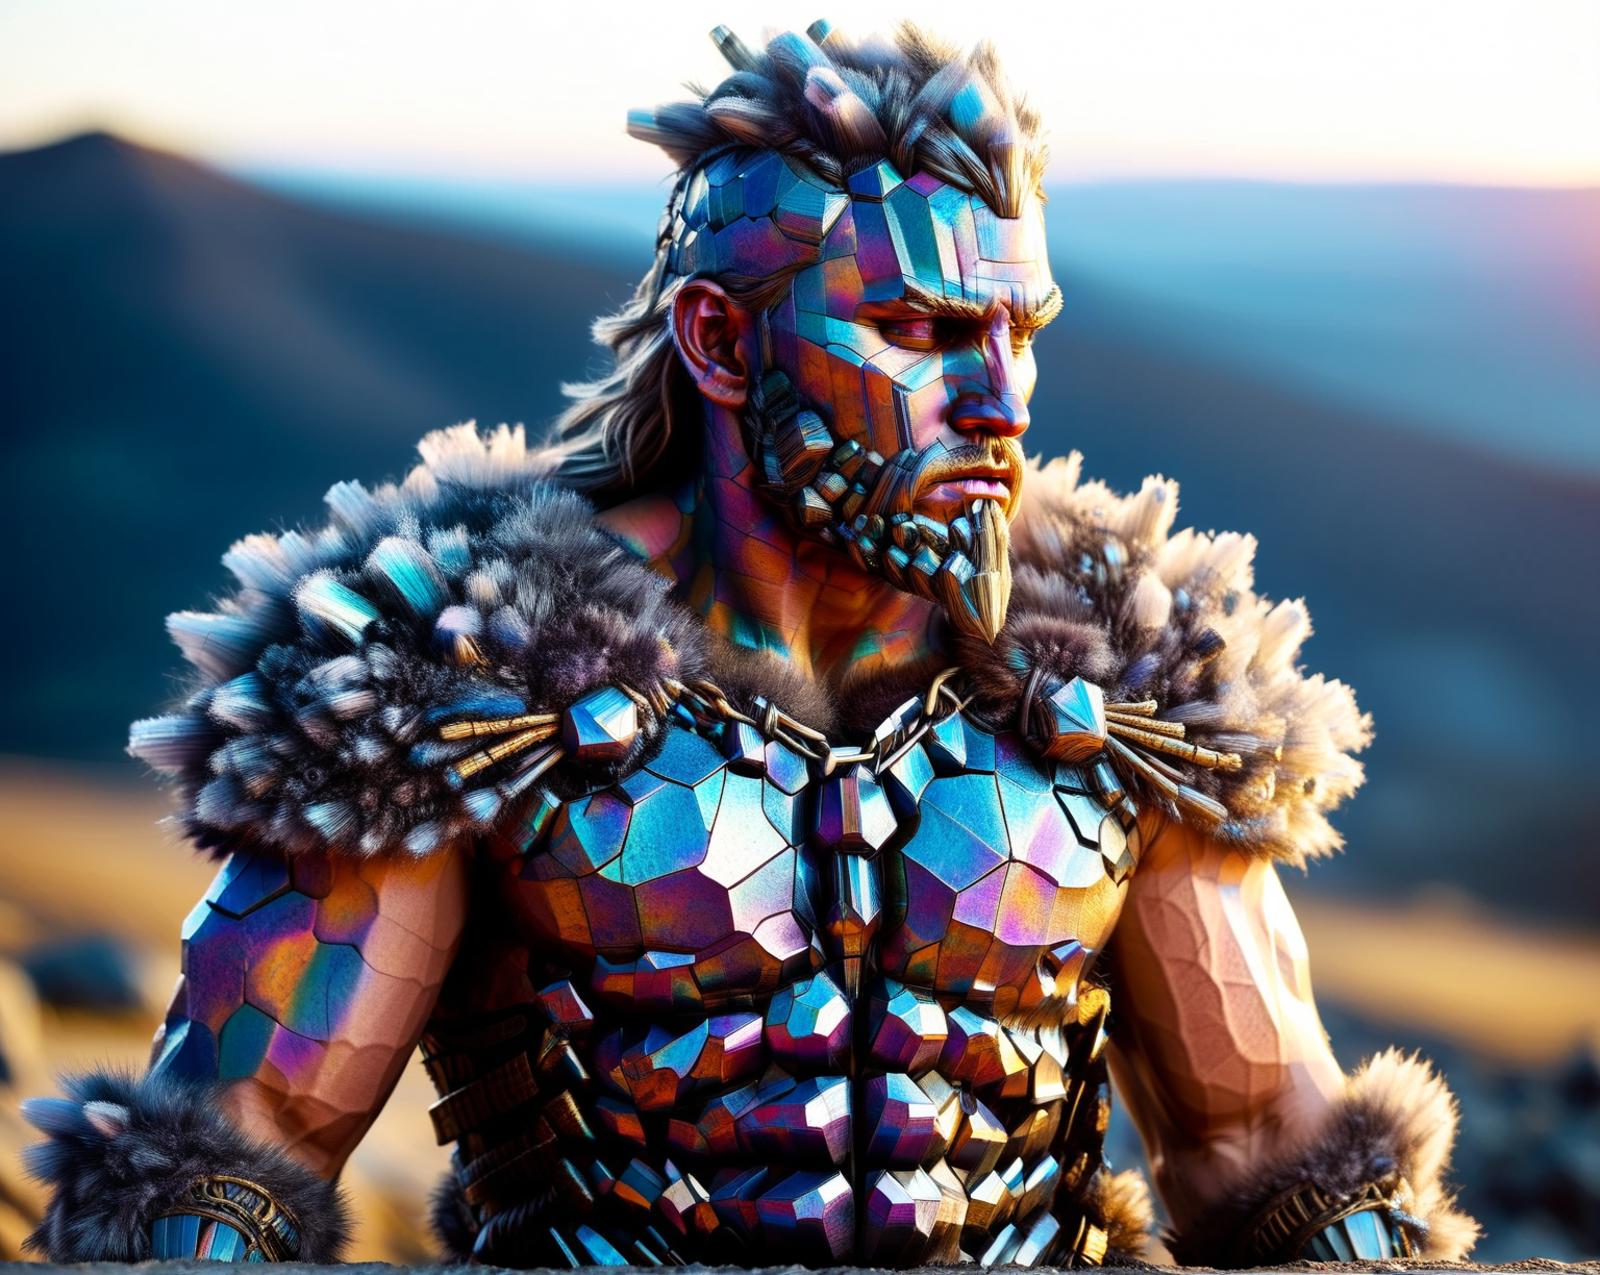 Man with a beard and shaggy hair wearing a colorful chest piece and standing in front of a mountain.